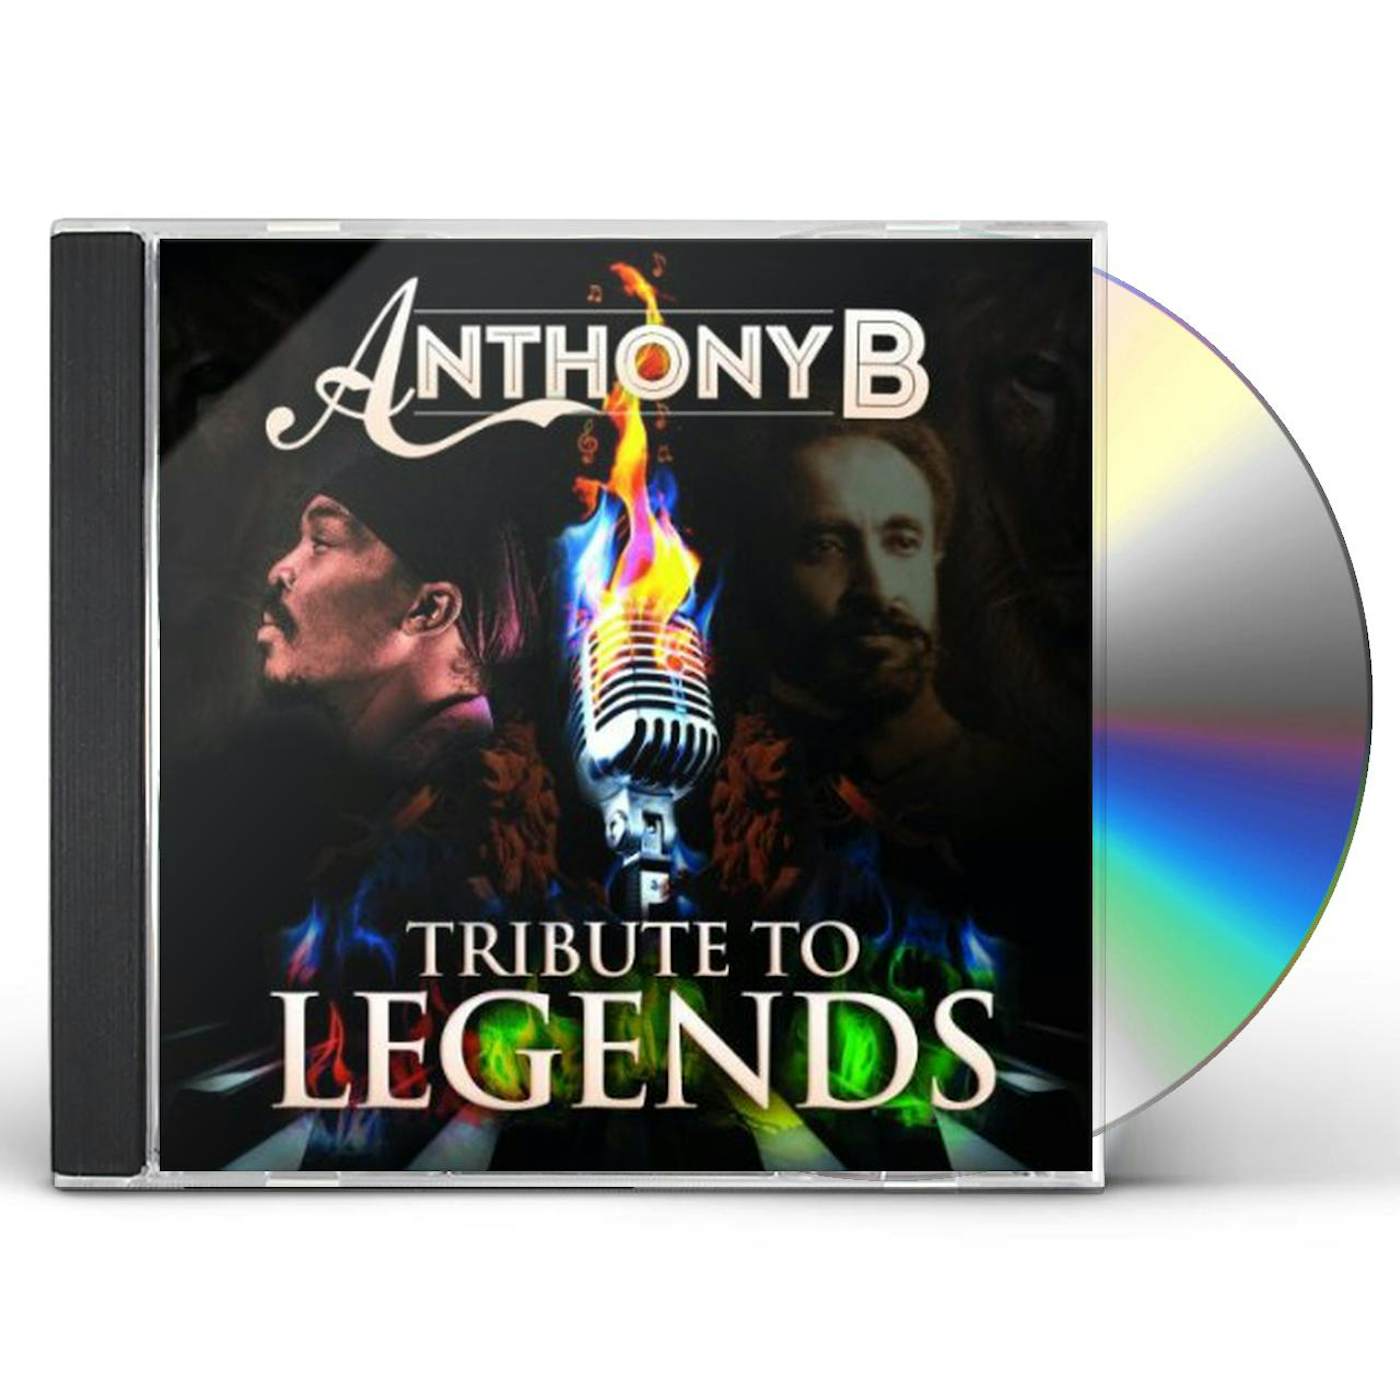 Anthony B TRIBUTE TO LEGENDS CD